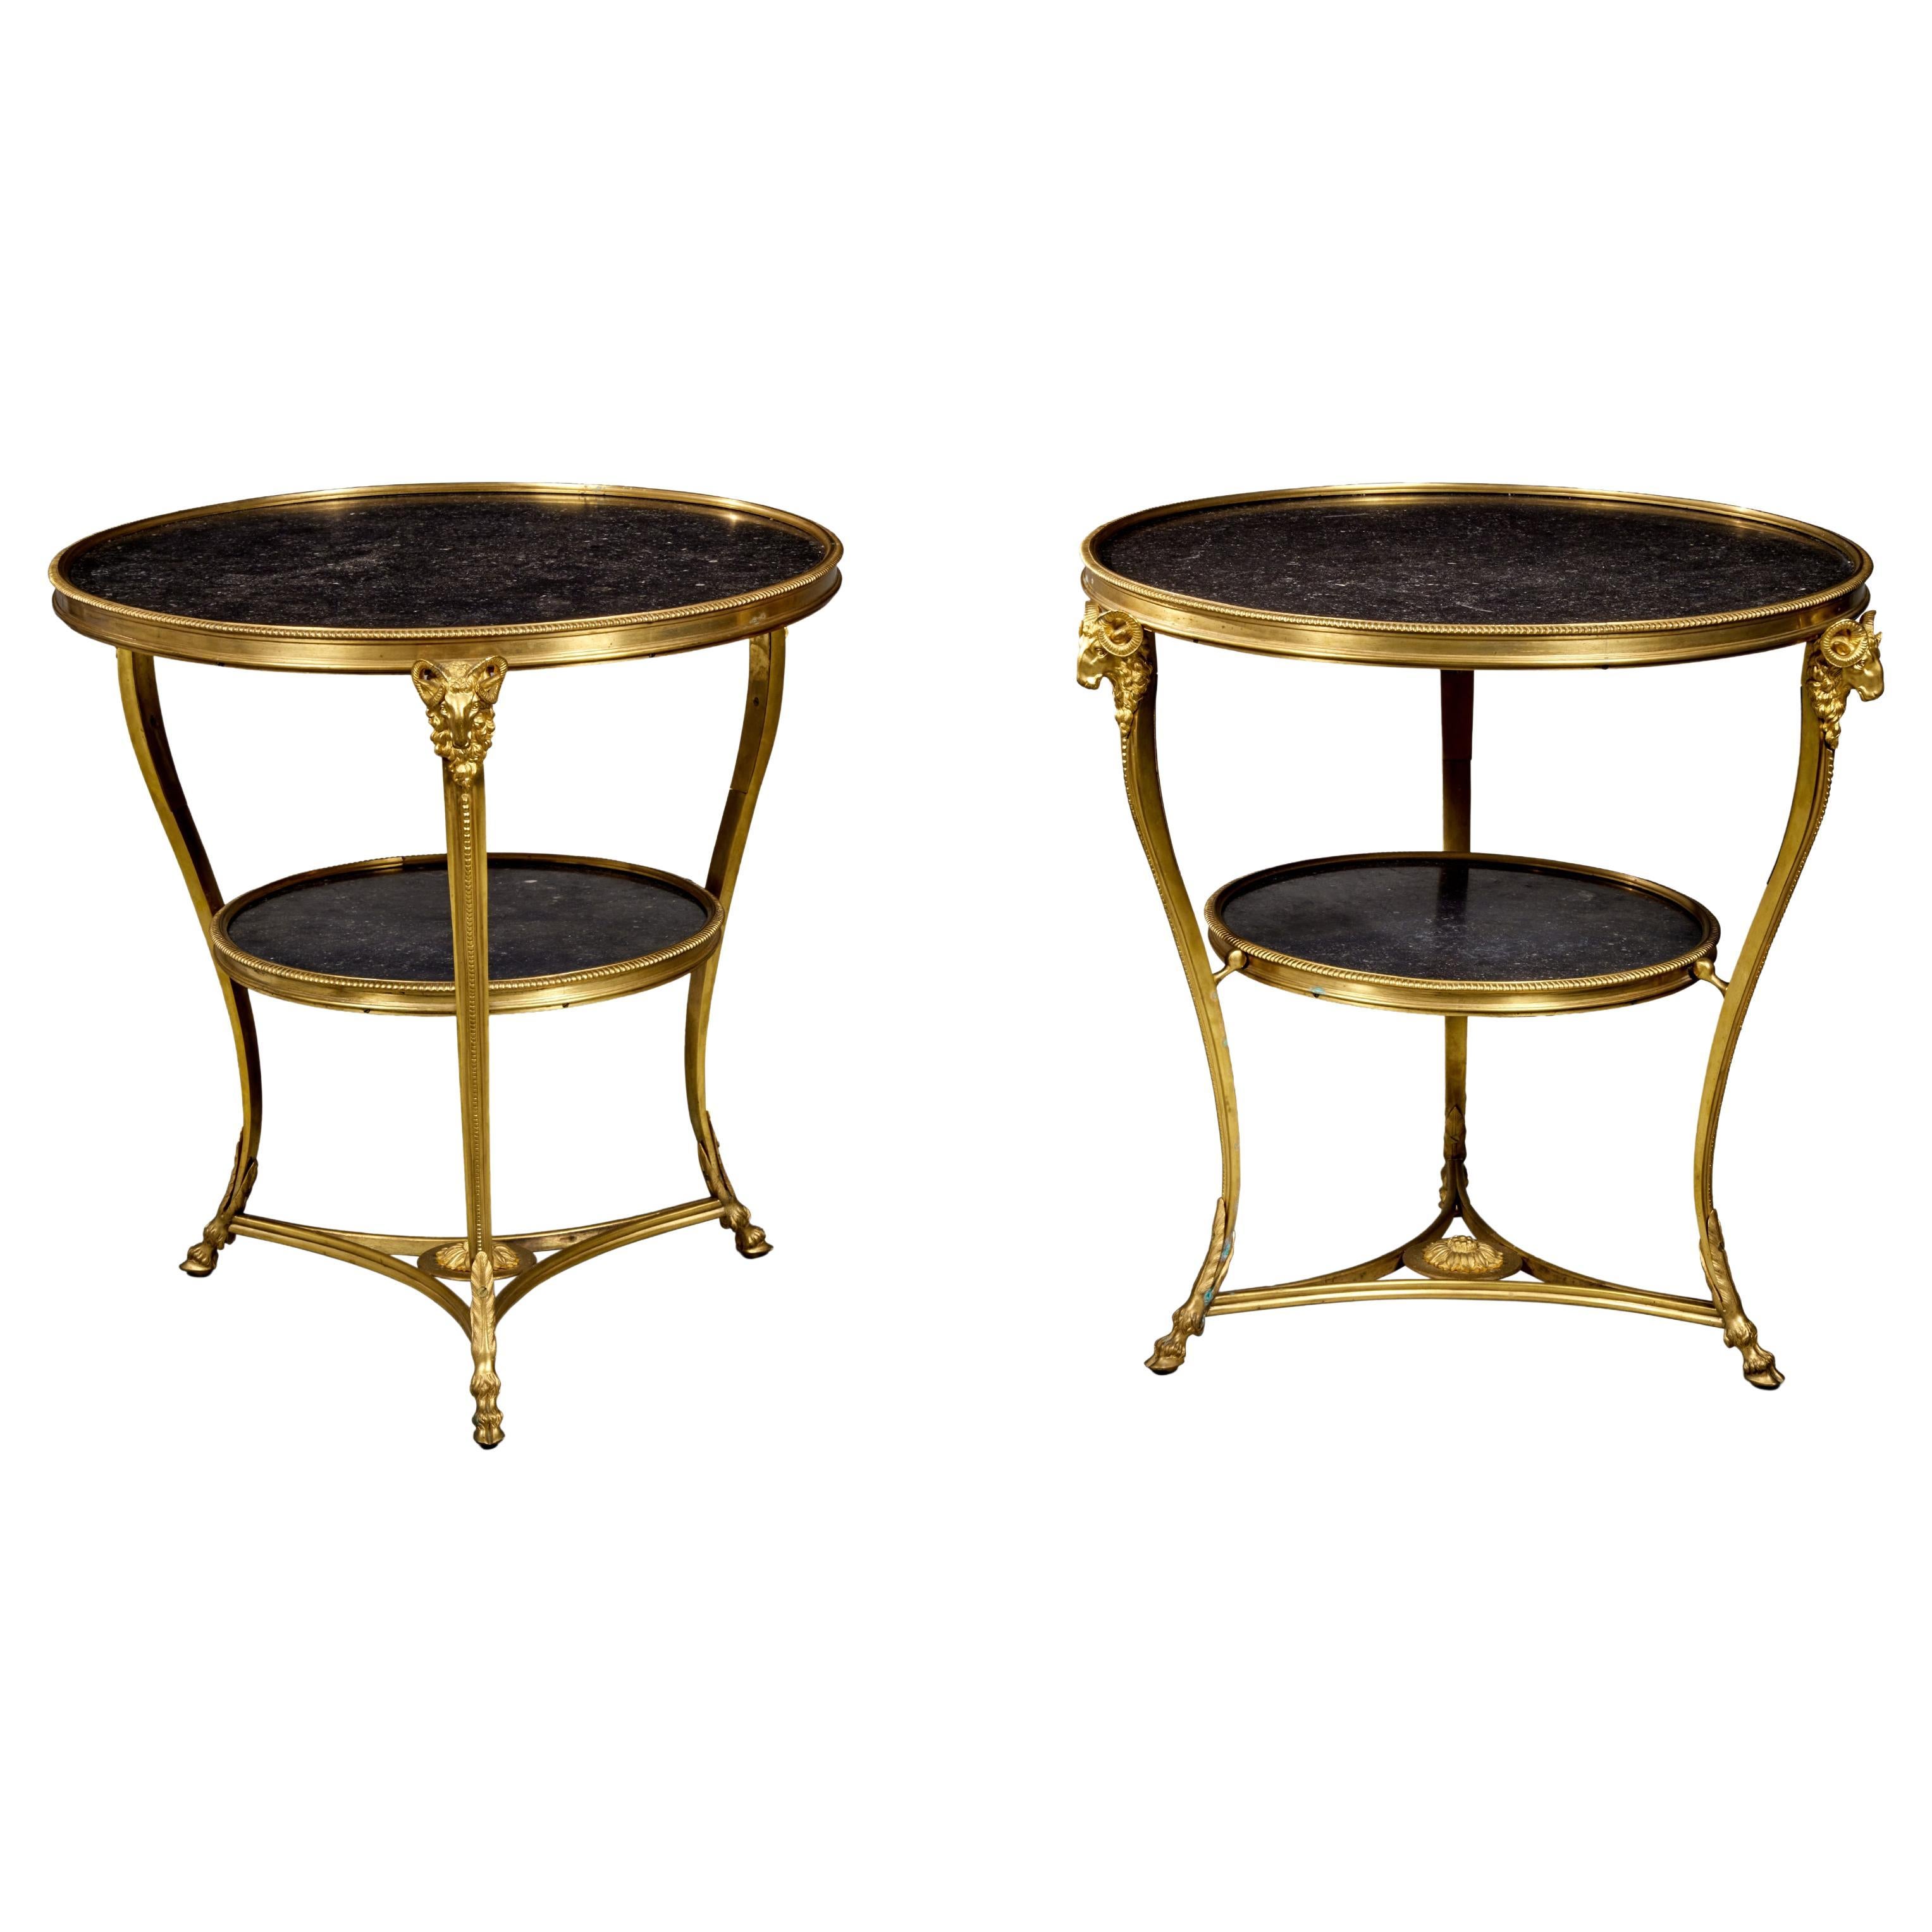 Pair of Directoire Style Gilt Bronze and Black Marble Gueridons